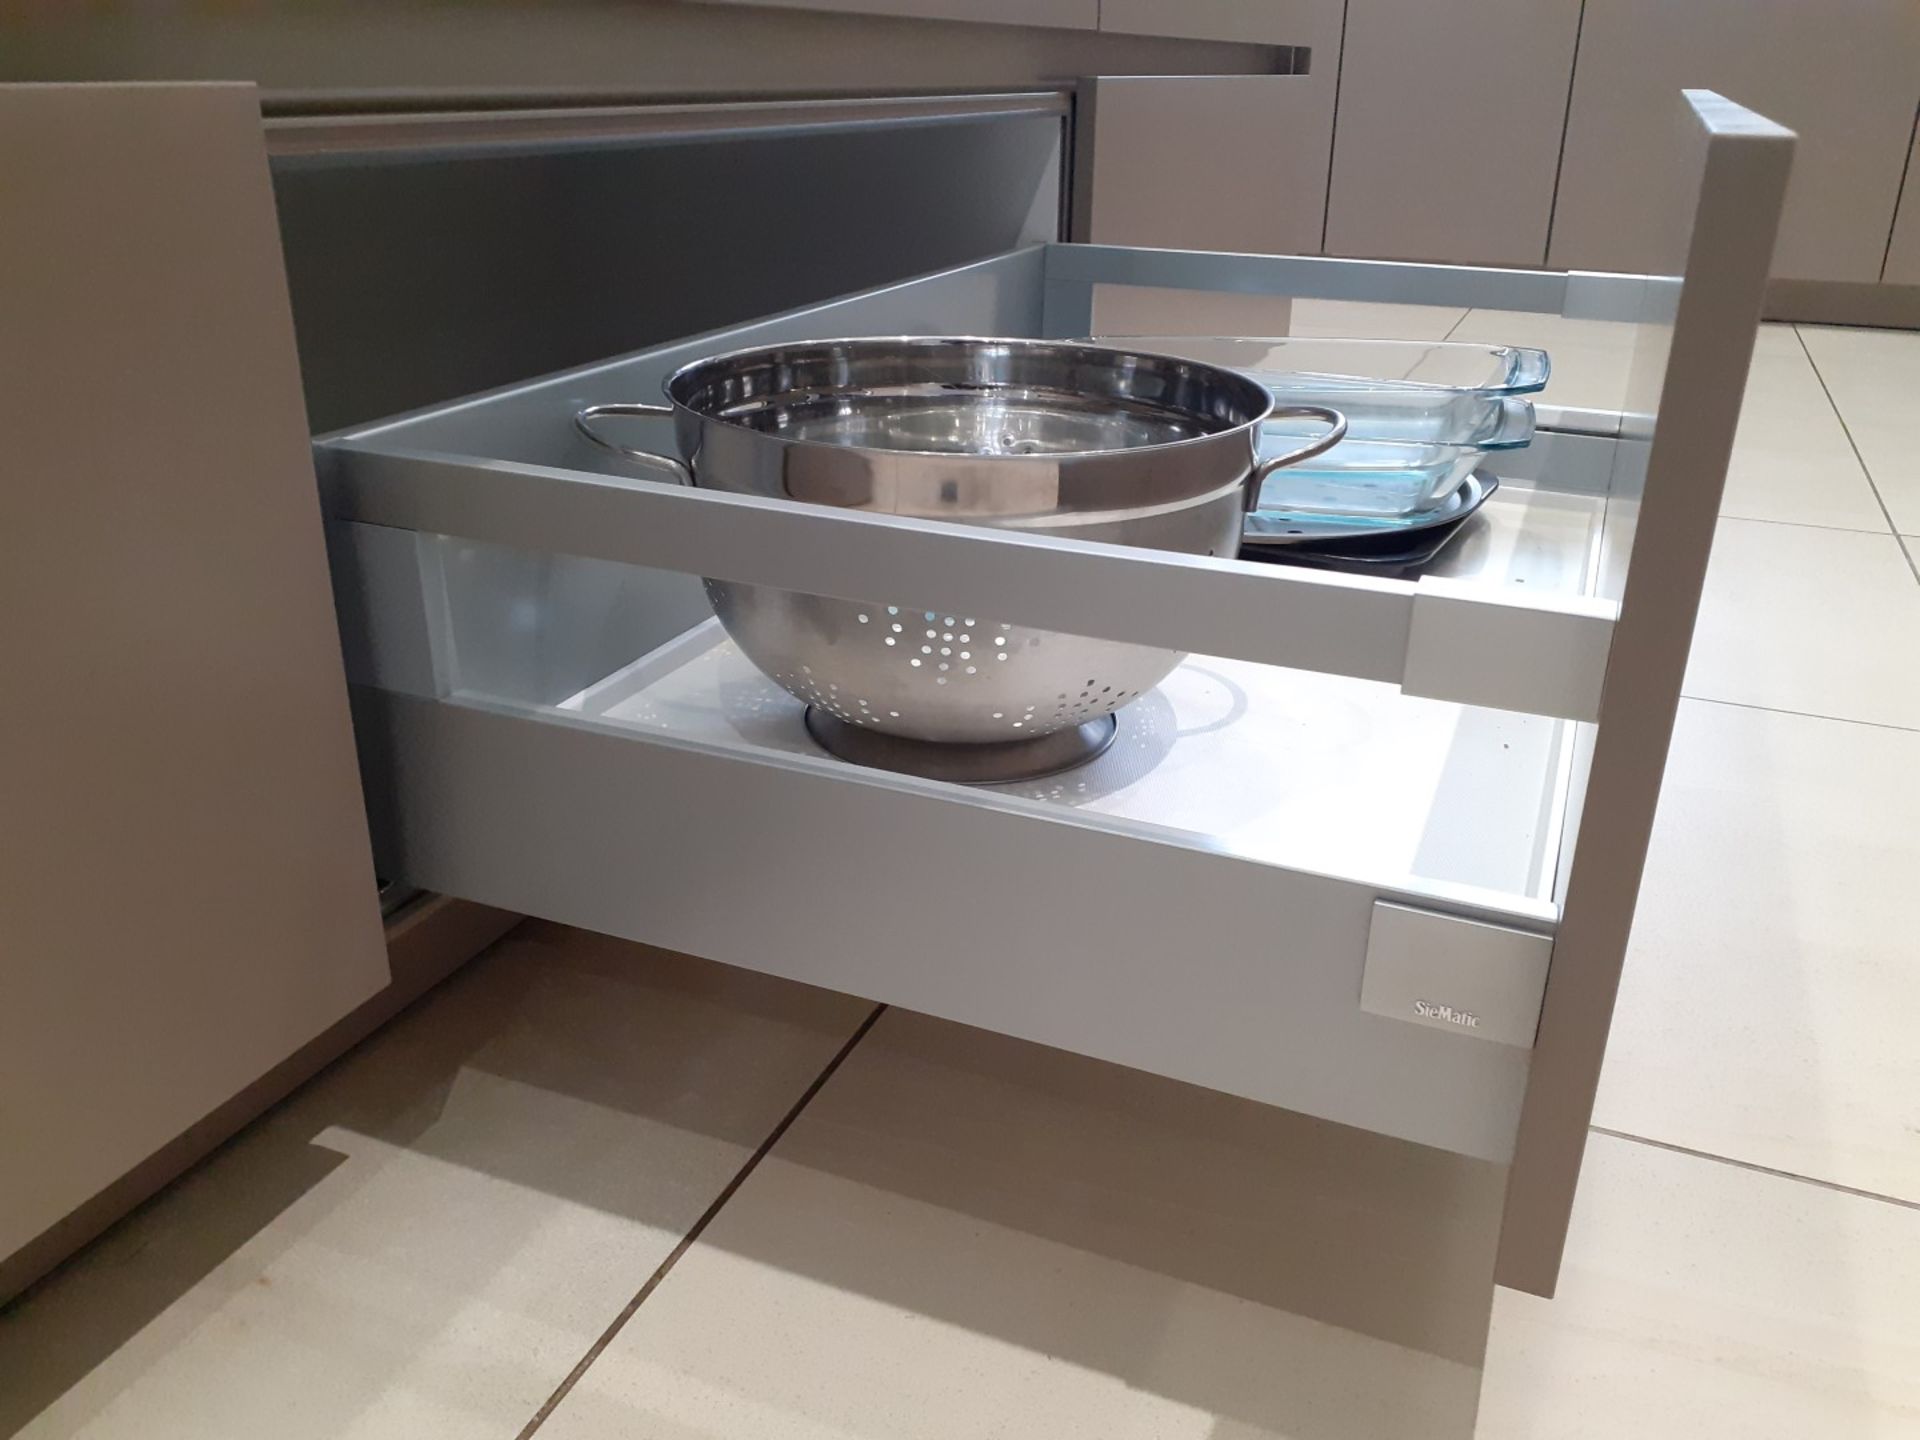 1 x SieMatic Handleless Fitted Kitchen With Intergrated NEFF Appliances, Corian Worktops And Island - Image 54 of 92